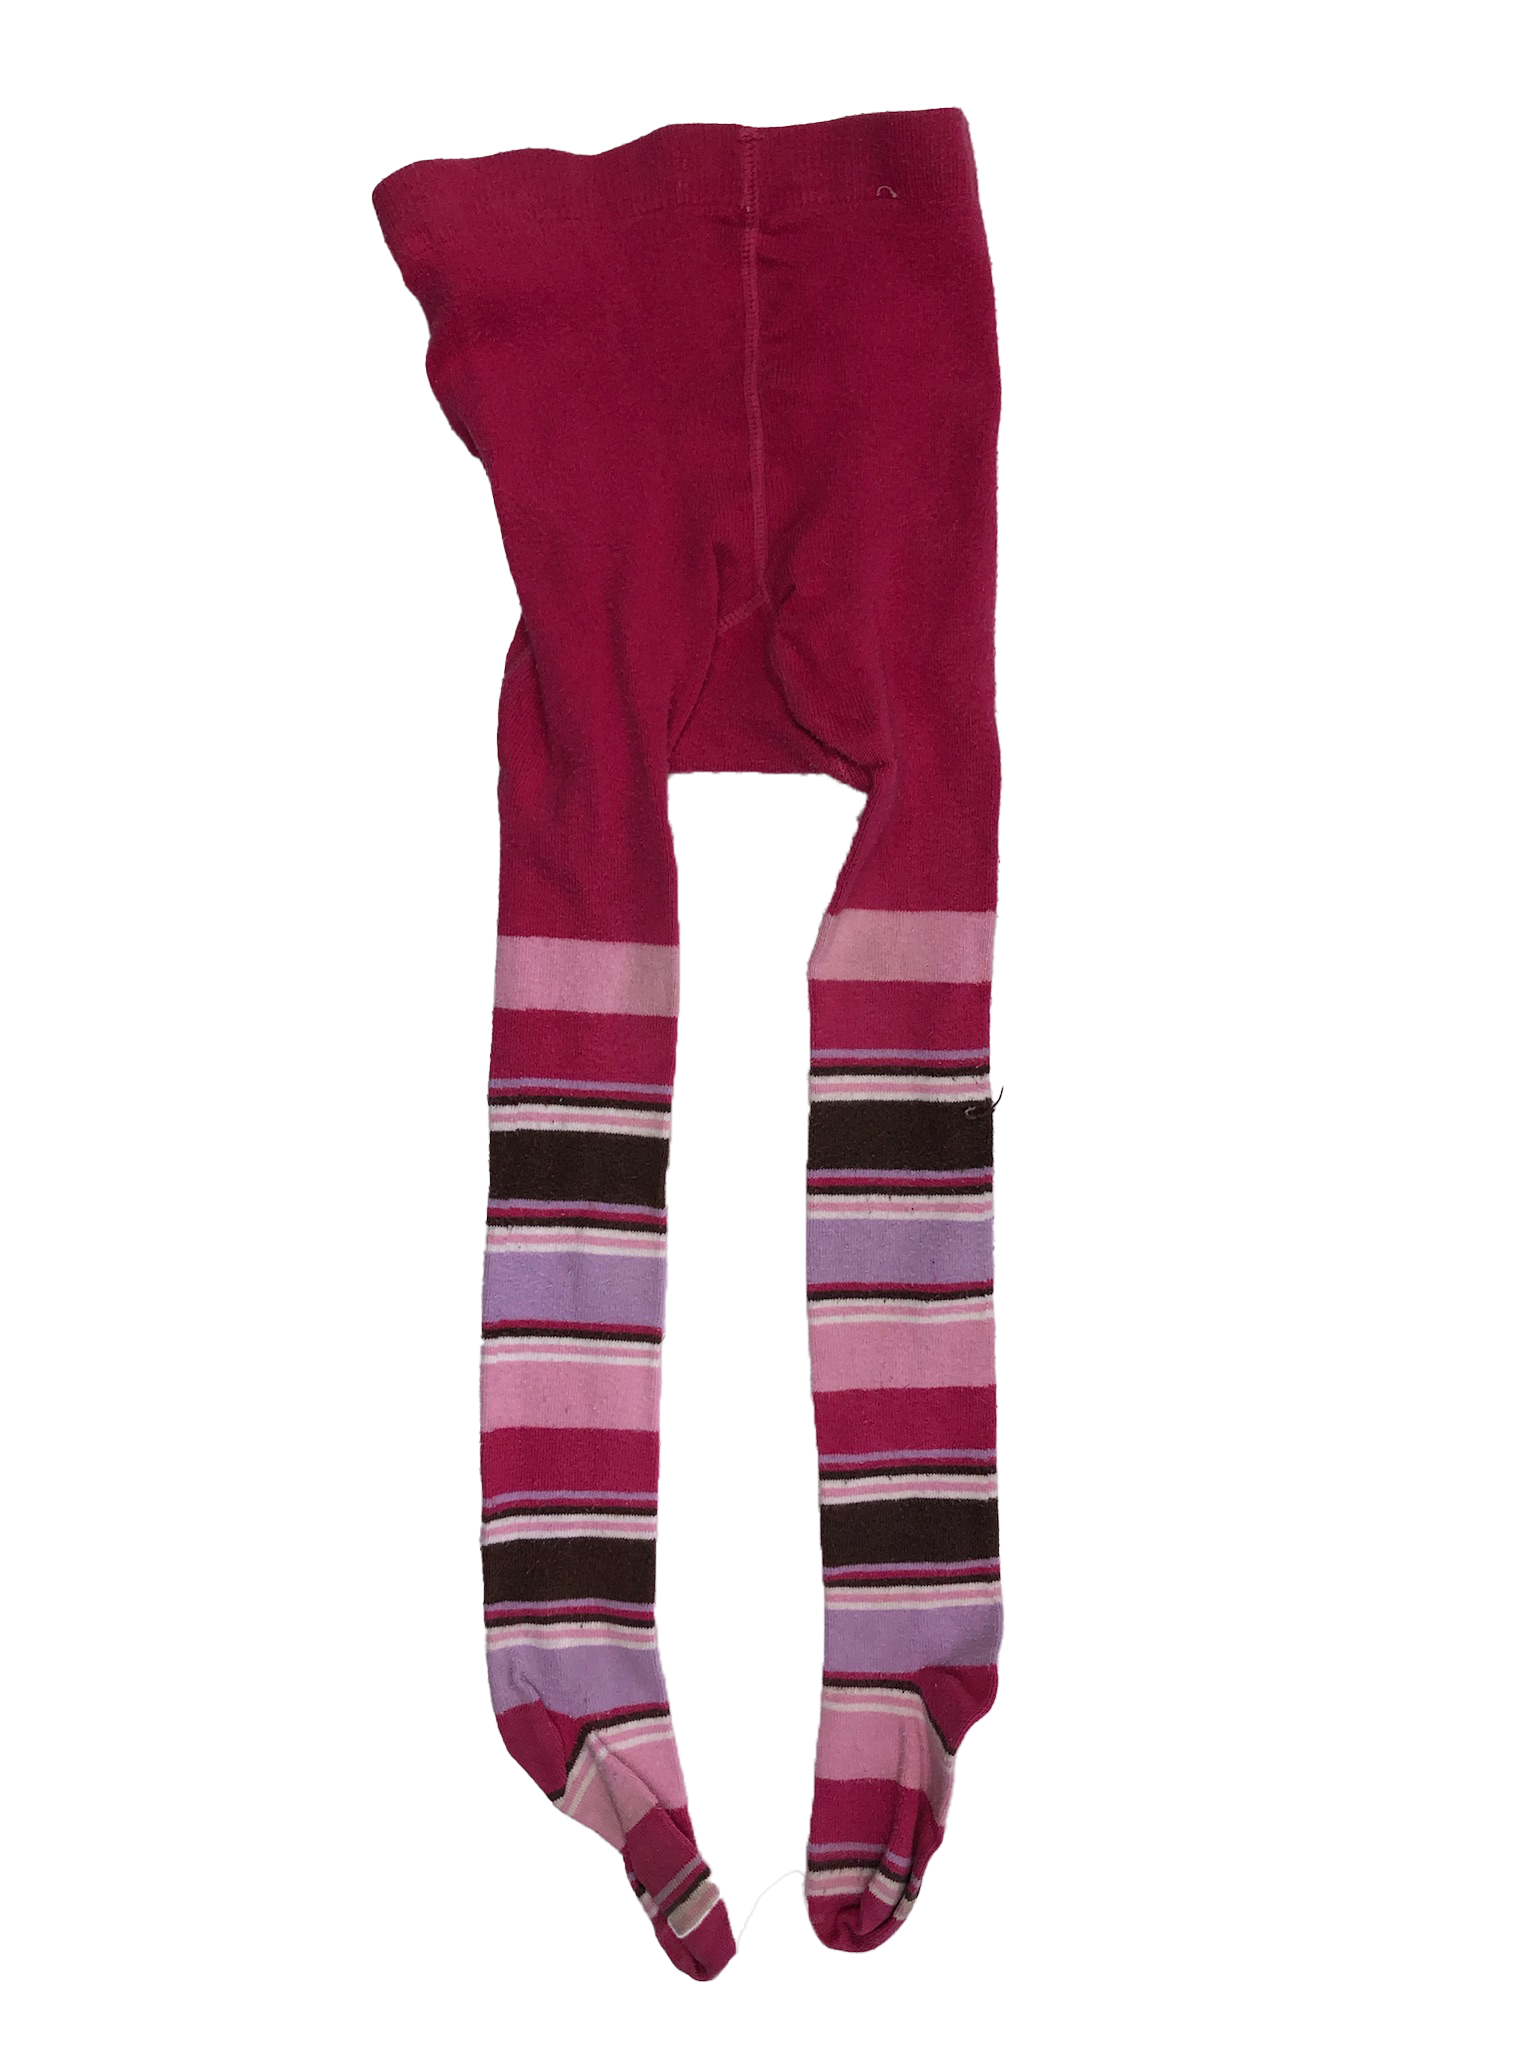 Roots Pink & Brown Striped Tights 4-6 – The Sweet Pea Shop